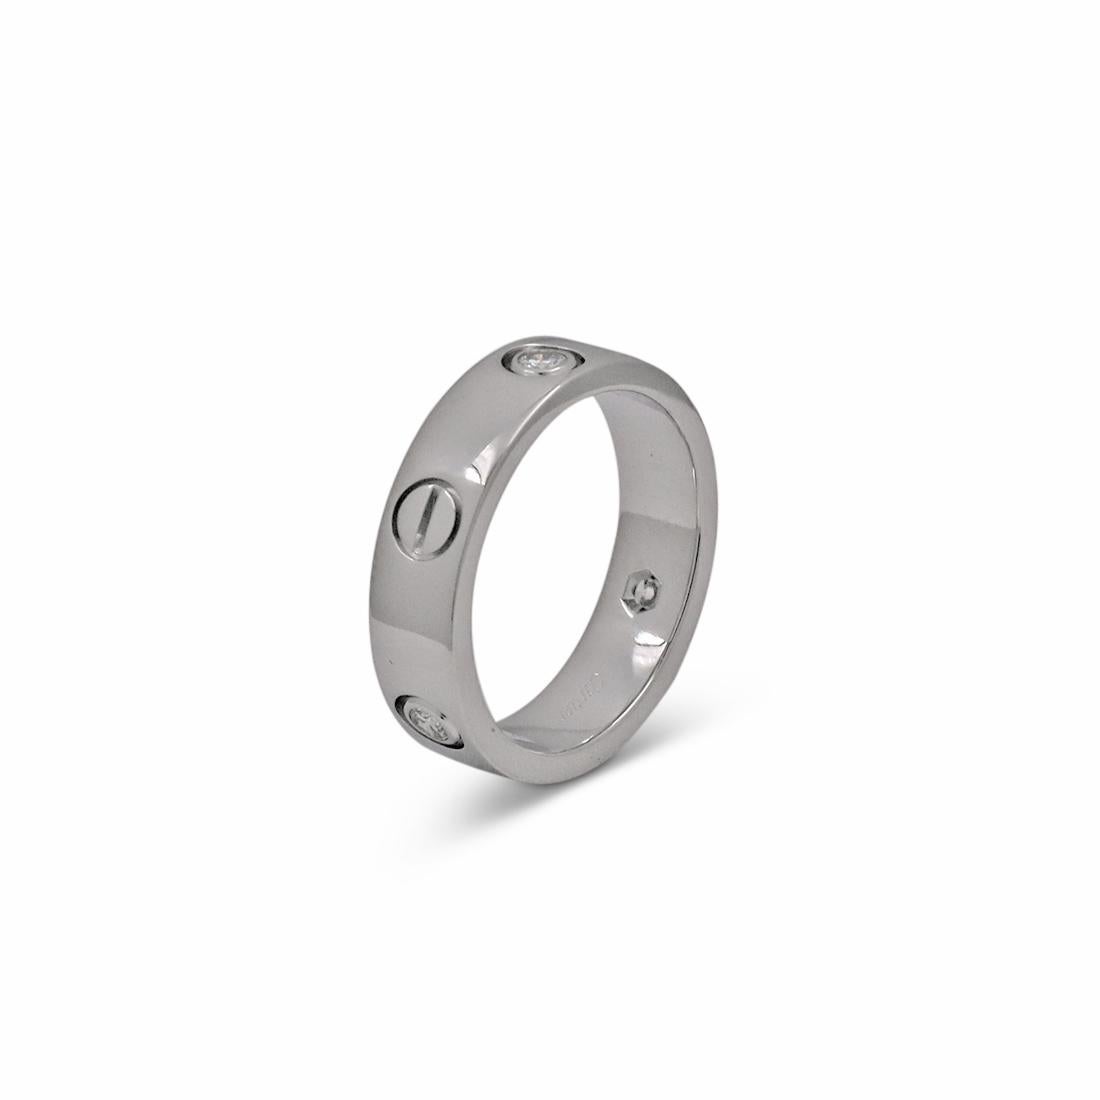 cartier 750 ring 52833a ito price